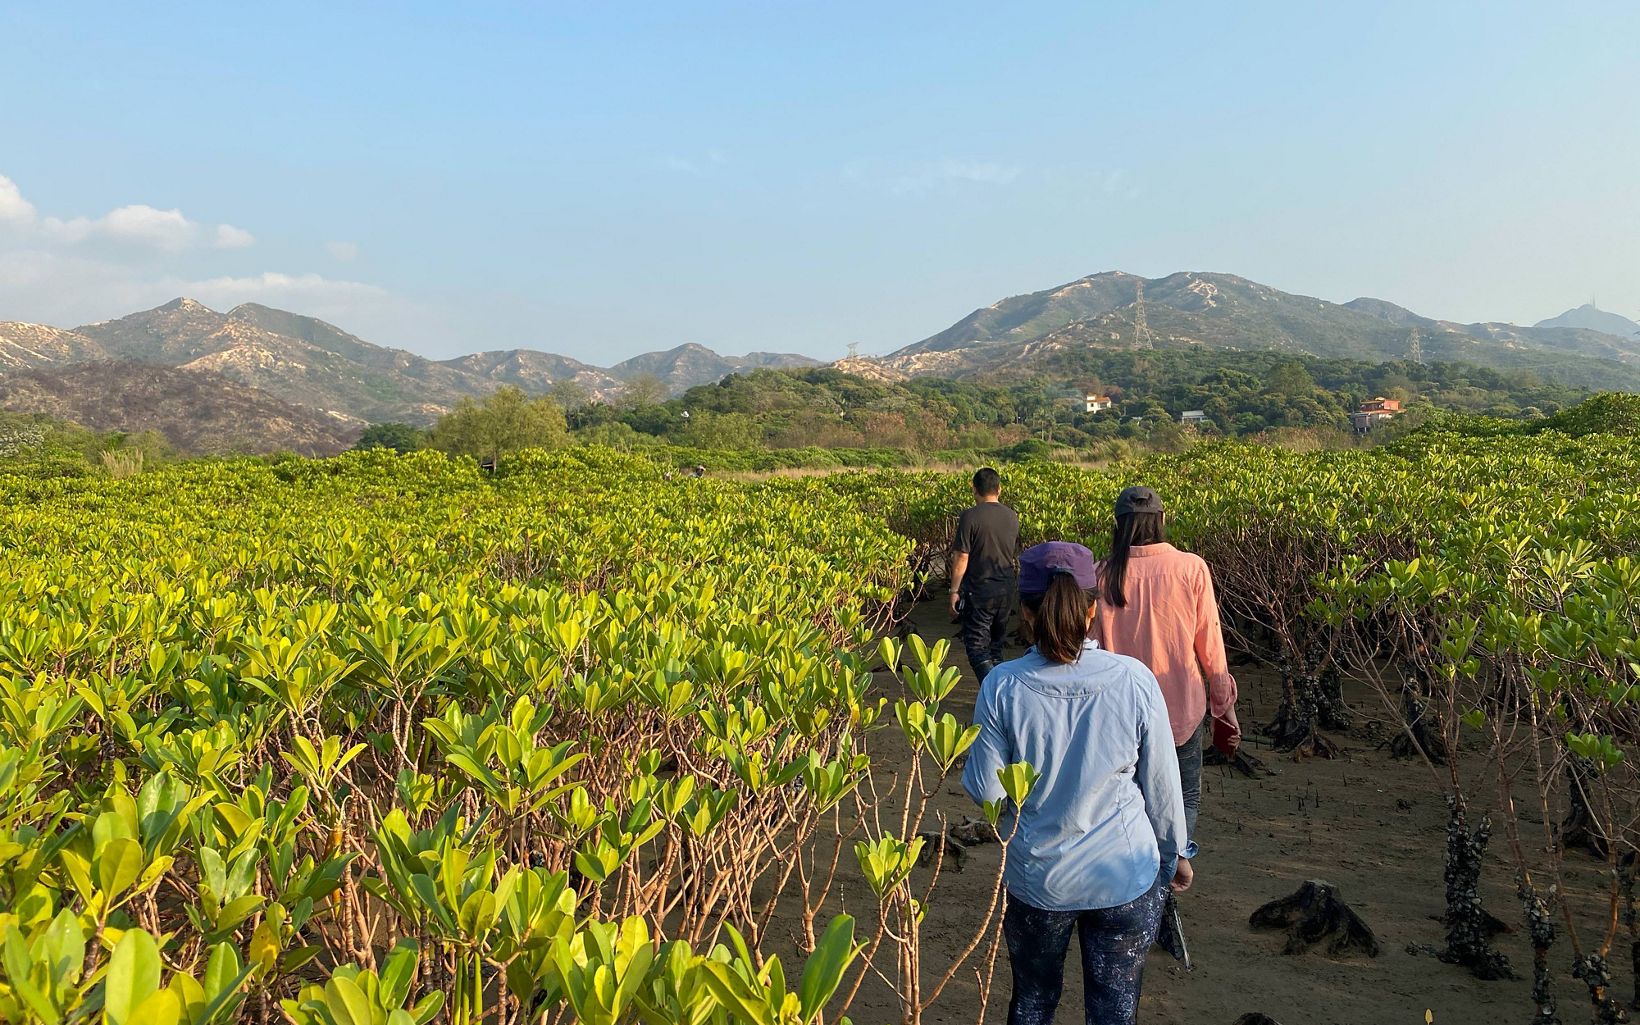 Three people with their backs to the camera walk through a field of mangroves.